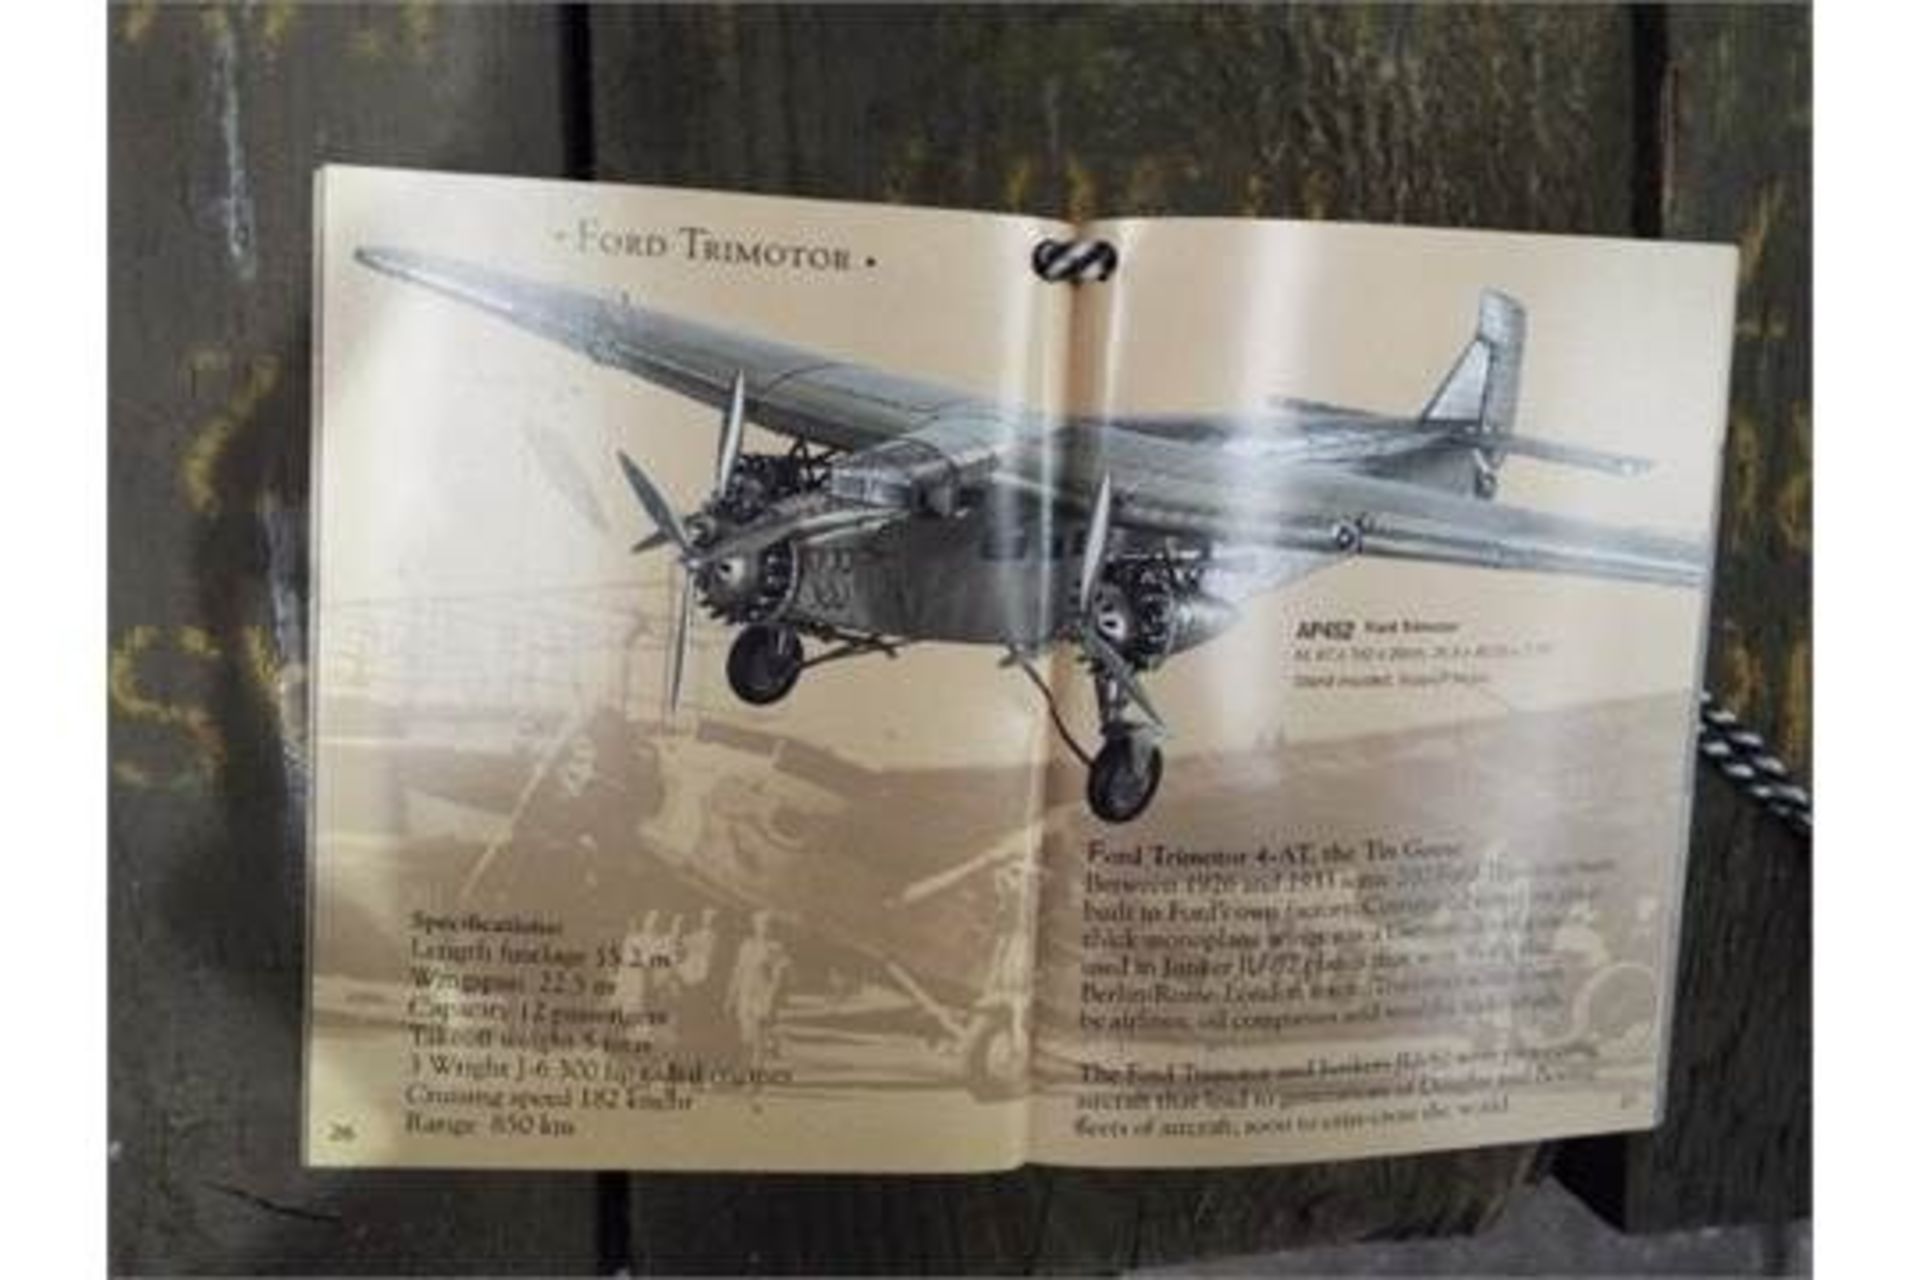 FORD TRIMOTOR 4-A " THE TIN GOOSE" Aluminium Scale Model - Image 8 of 8